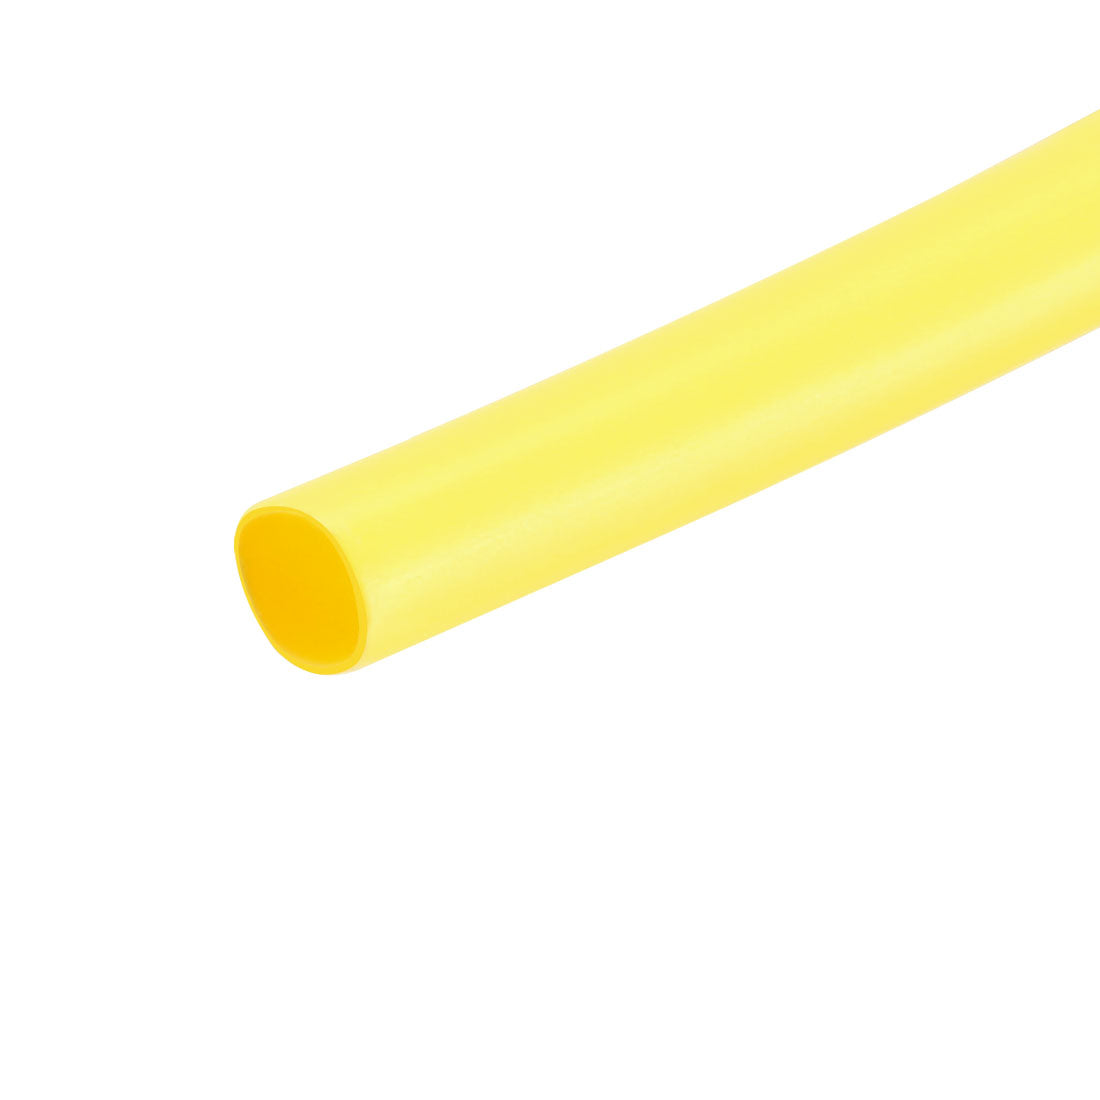 uxcell Uxcell Heat Shrink Tube 2:1 Electrical Insulation Tube Wire Cable Tubing Sleeving Wrap Yellow 0.6mm Diameter 10m Long